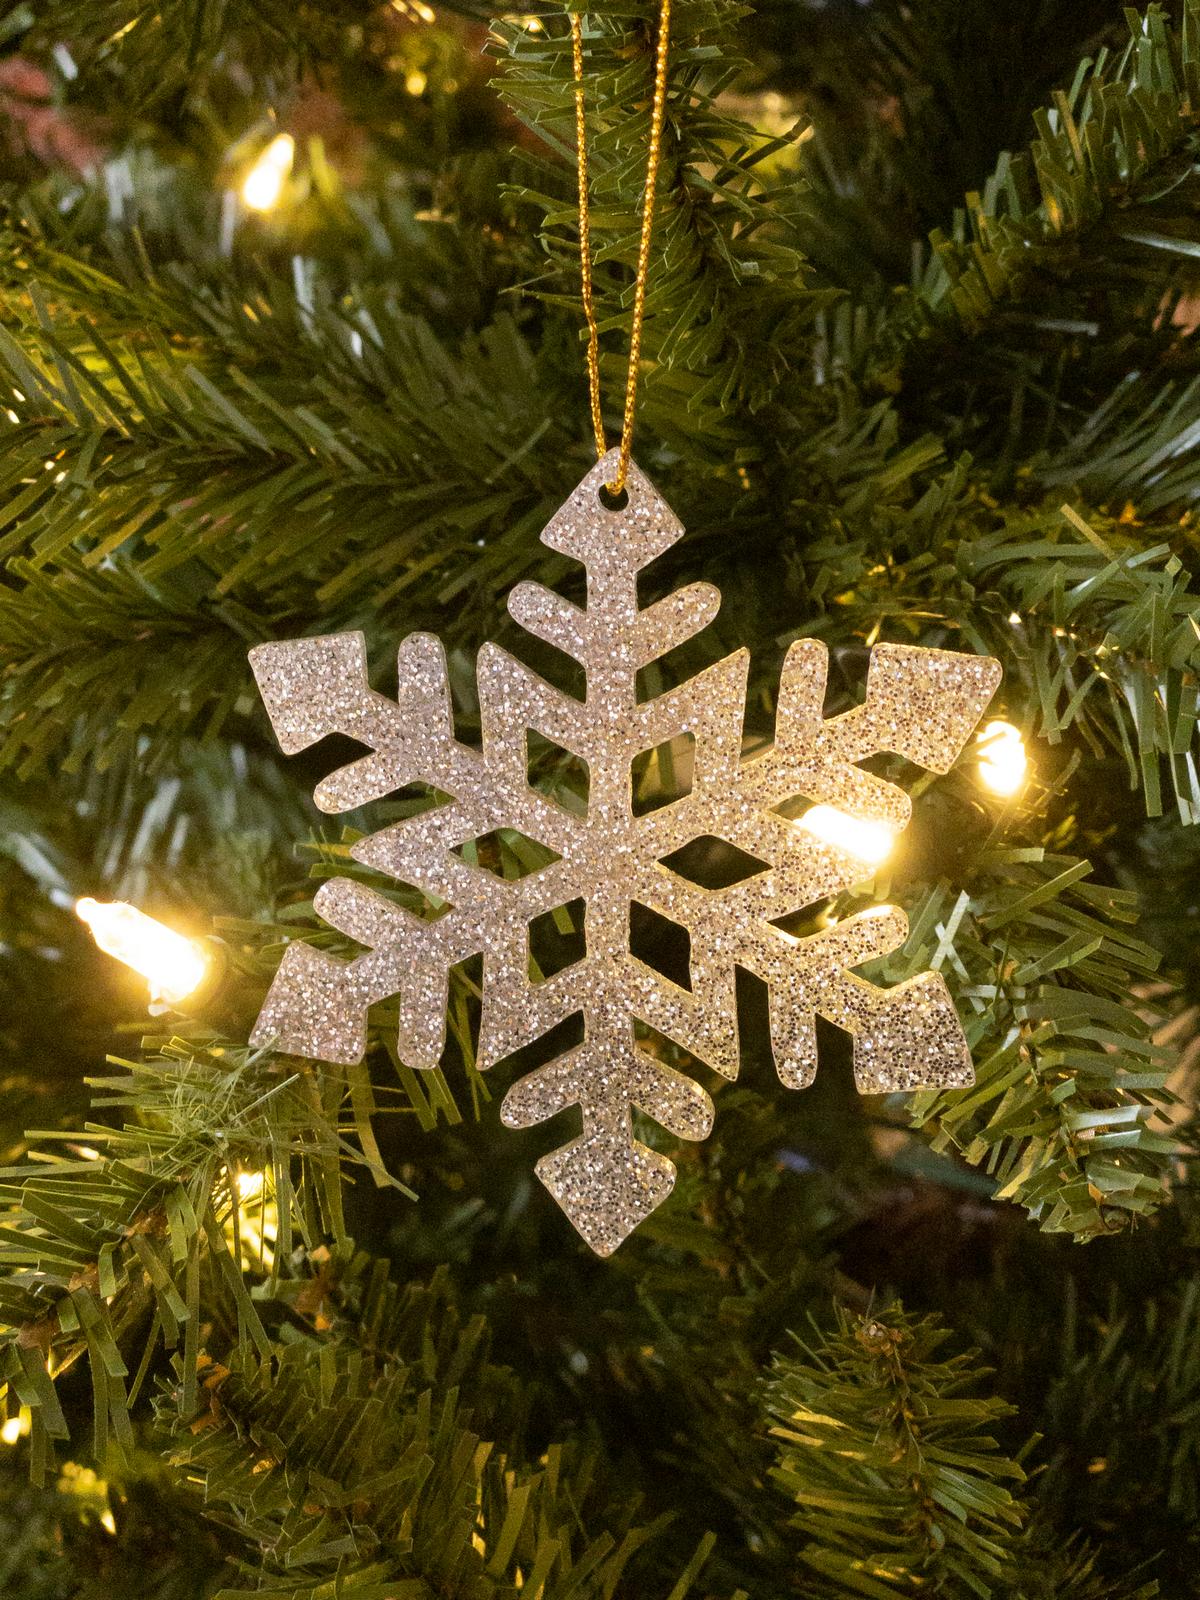 Snowflake Decorations - pack of 6